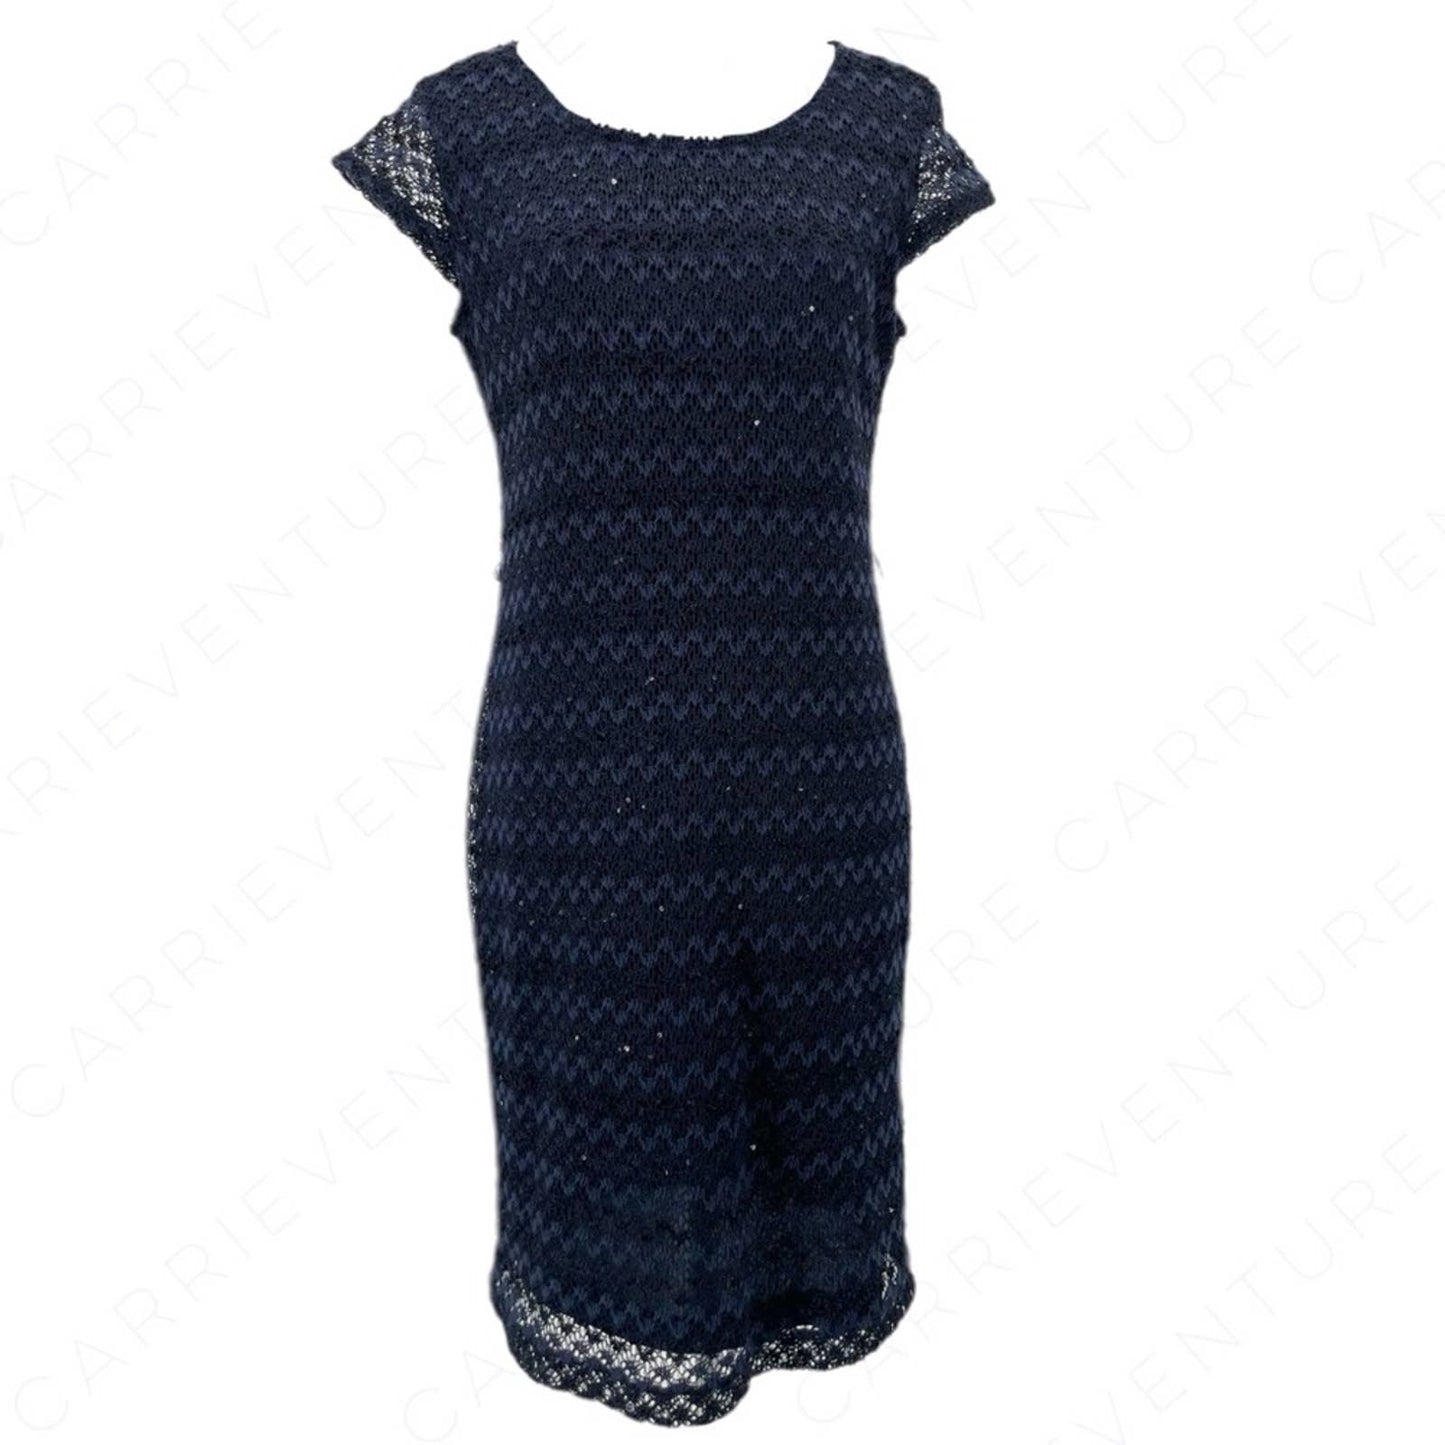 Sharagano Dress Deep Navy Blue Lace Overlay Sequin Shimmer Chevron Pattern Size 6